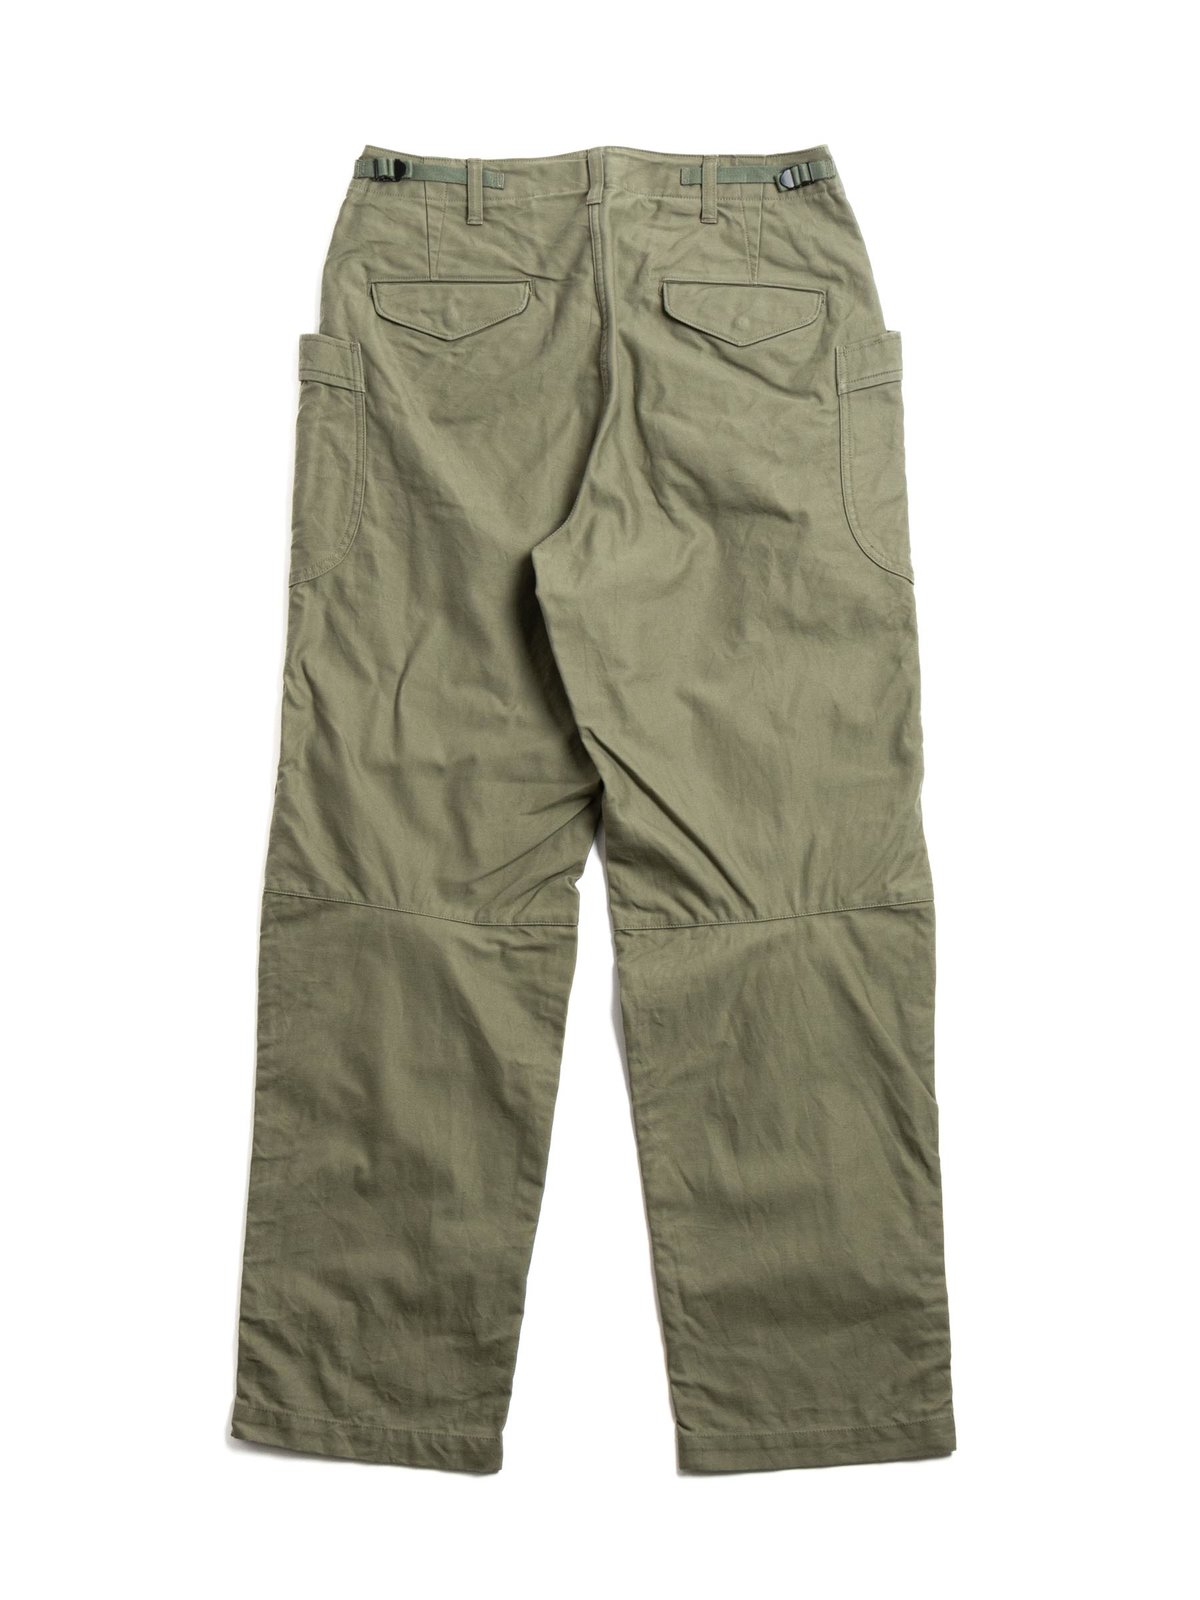 FATIGUE TROUSER OLIVE - Image 6